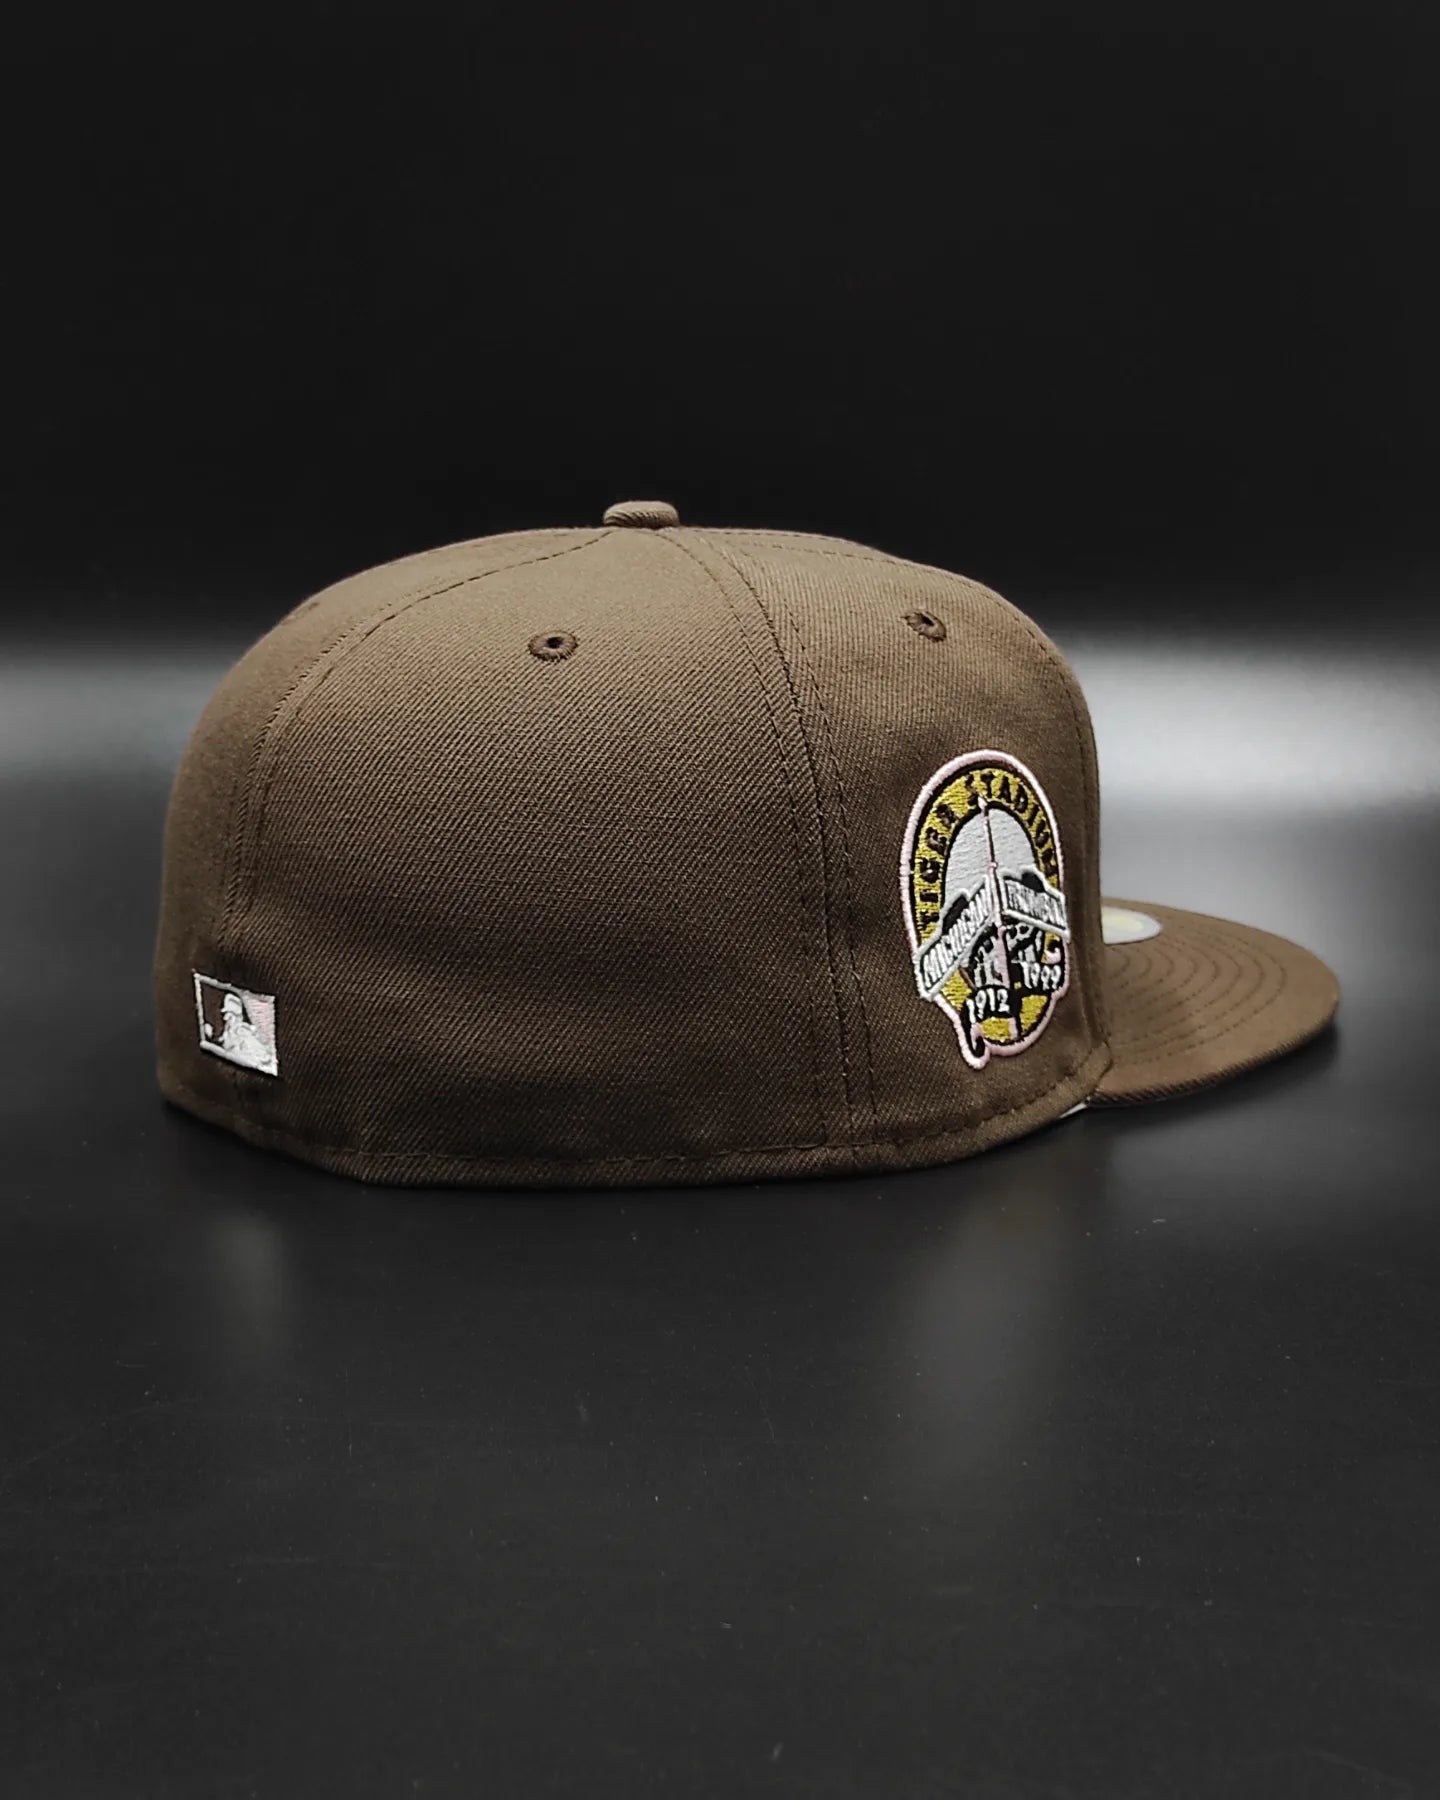 New Era Detroit Tigers STADIUM patch coffee pink edition 59fifty